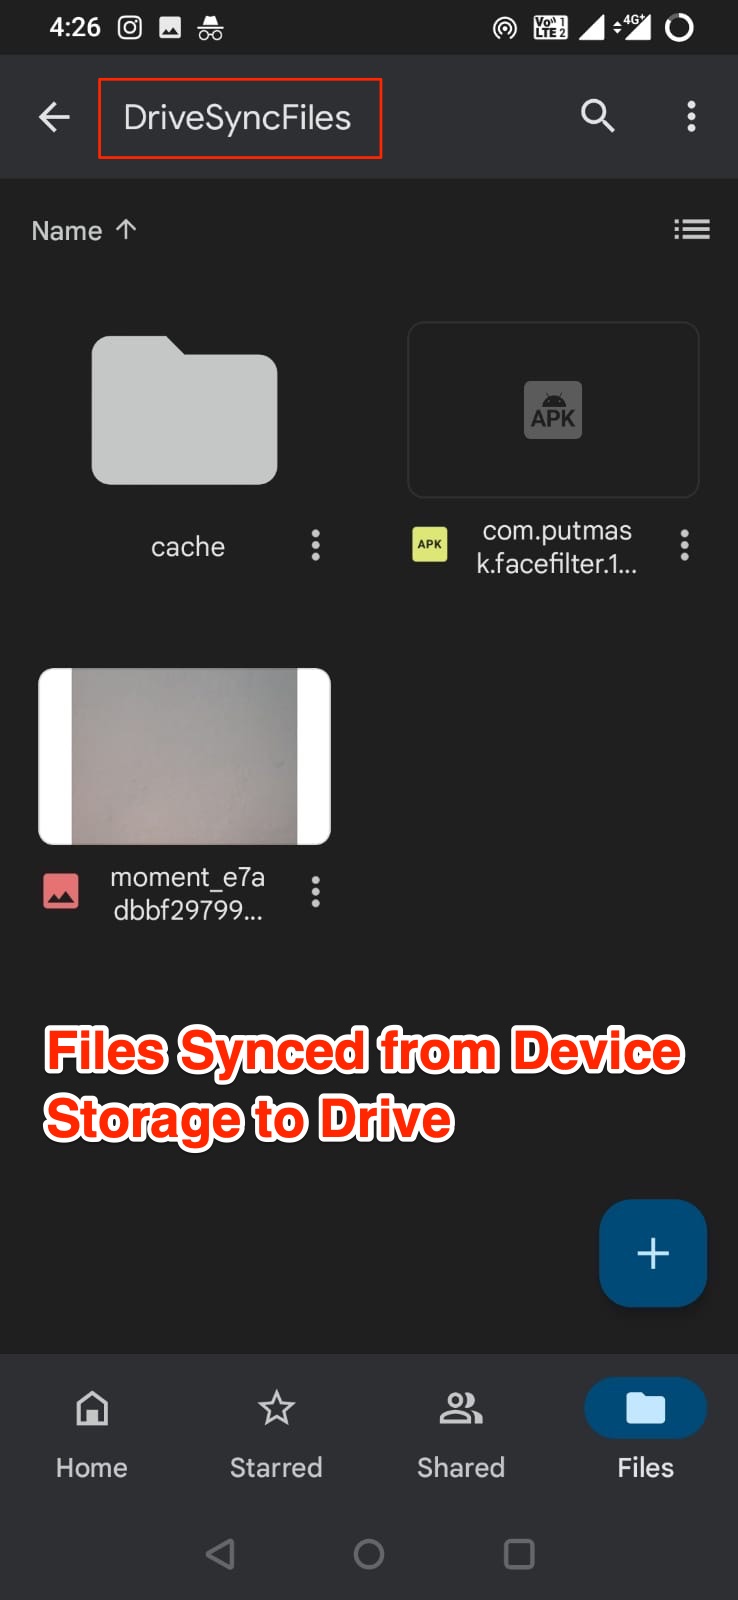 Files Synced from Device Storage to Drive